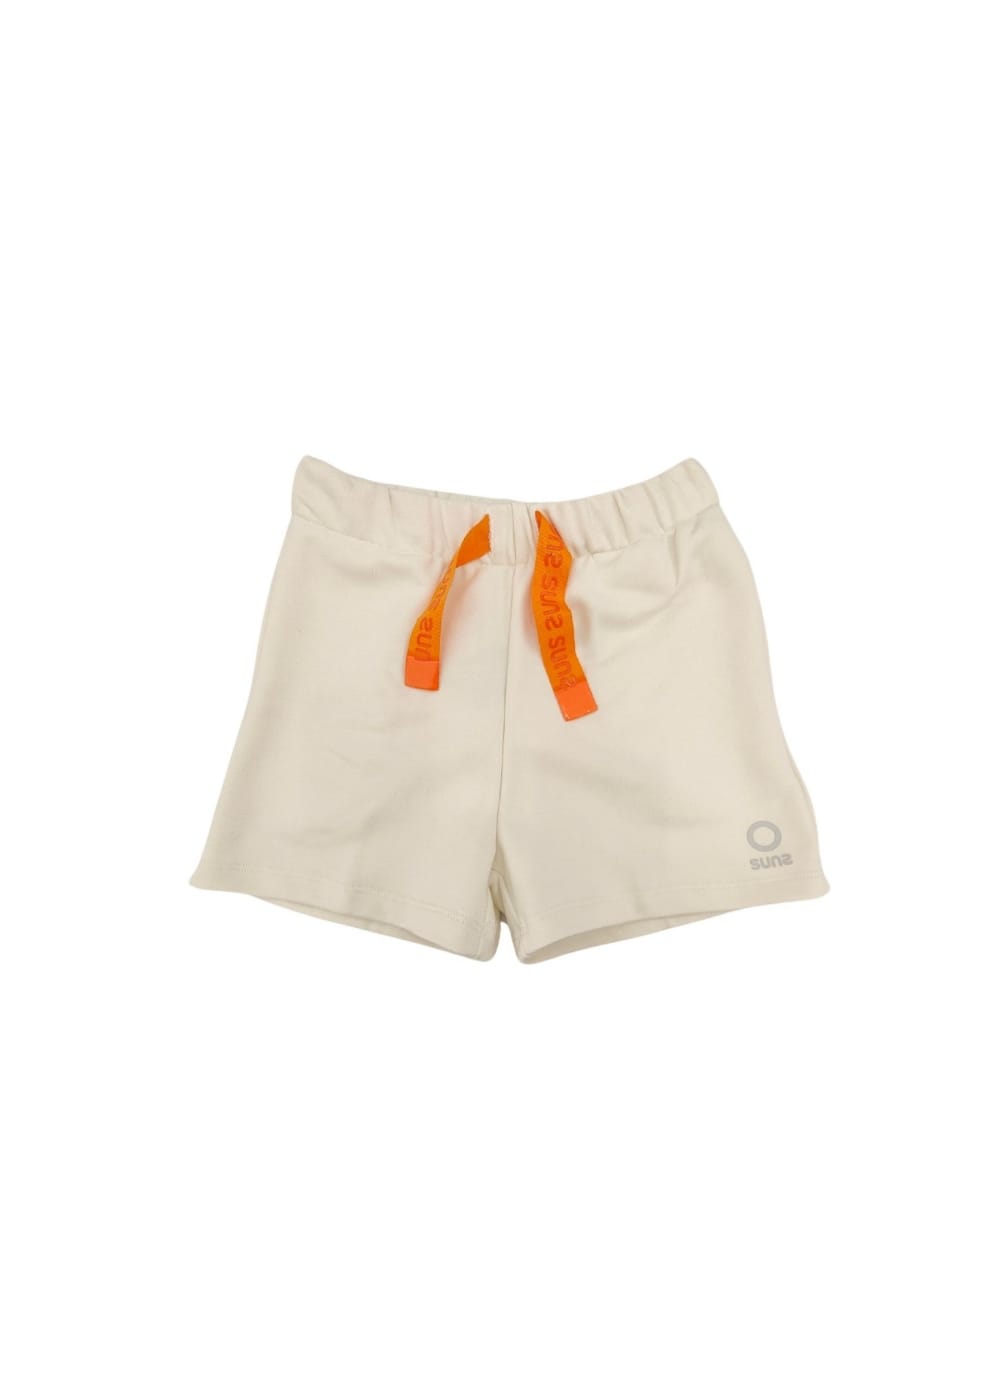 Featured image for “Suns Shorts Laccio Fluo”